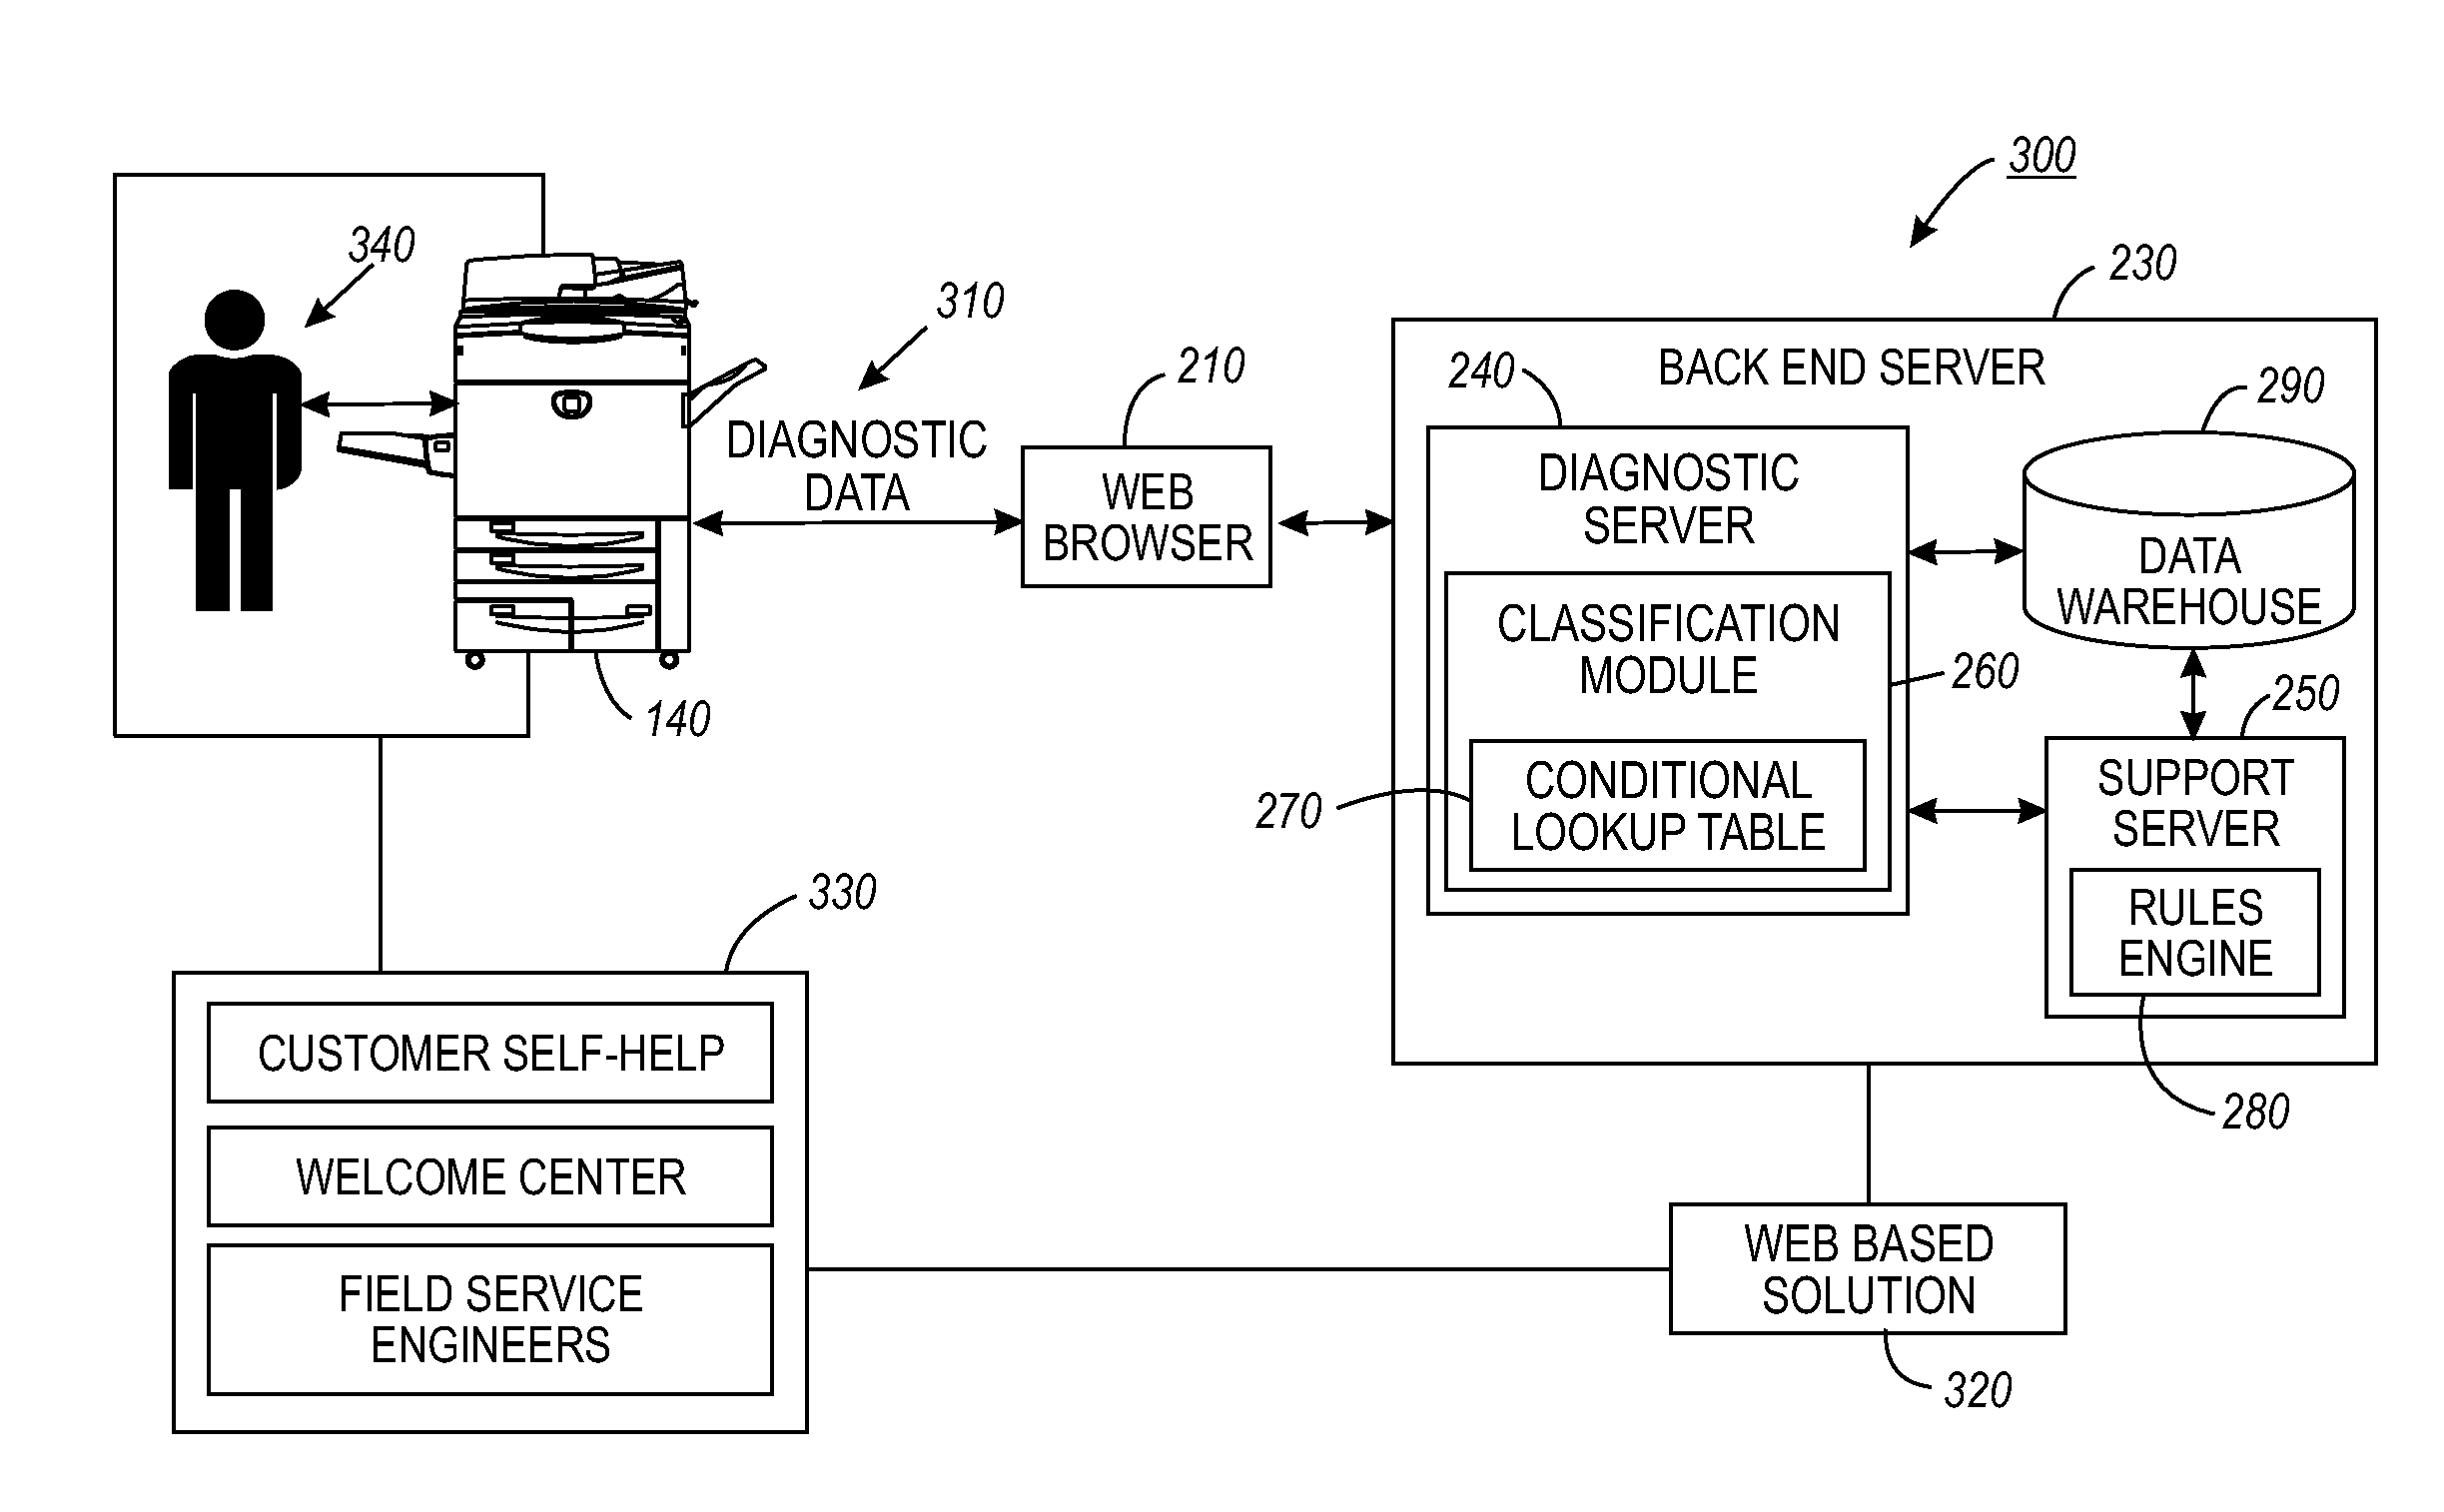 Remote diagnostic system and method based on device data classification